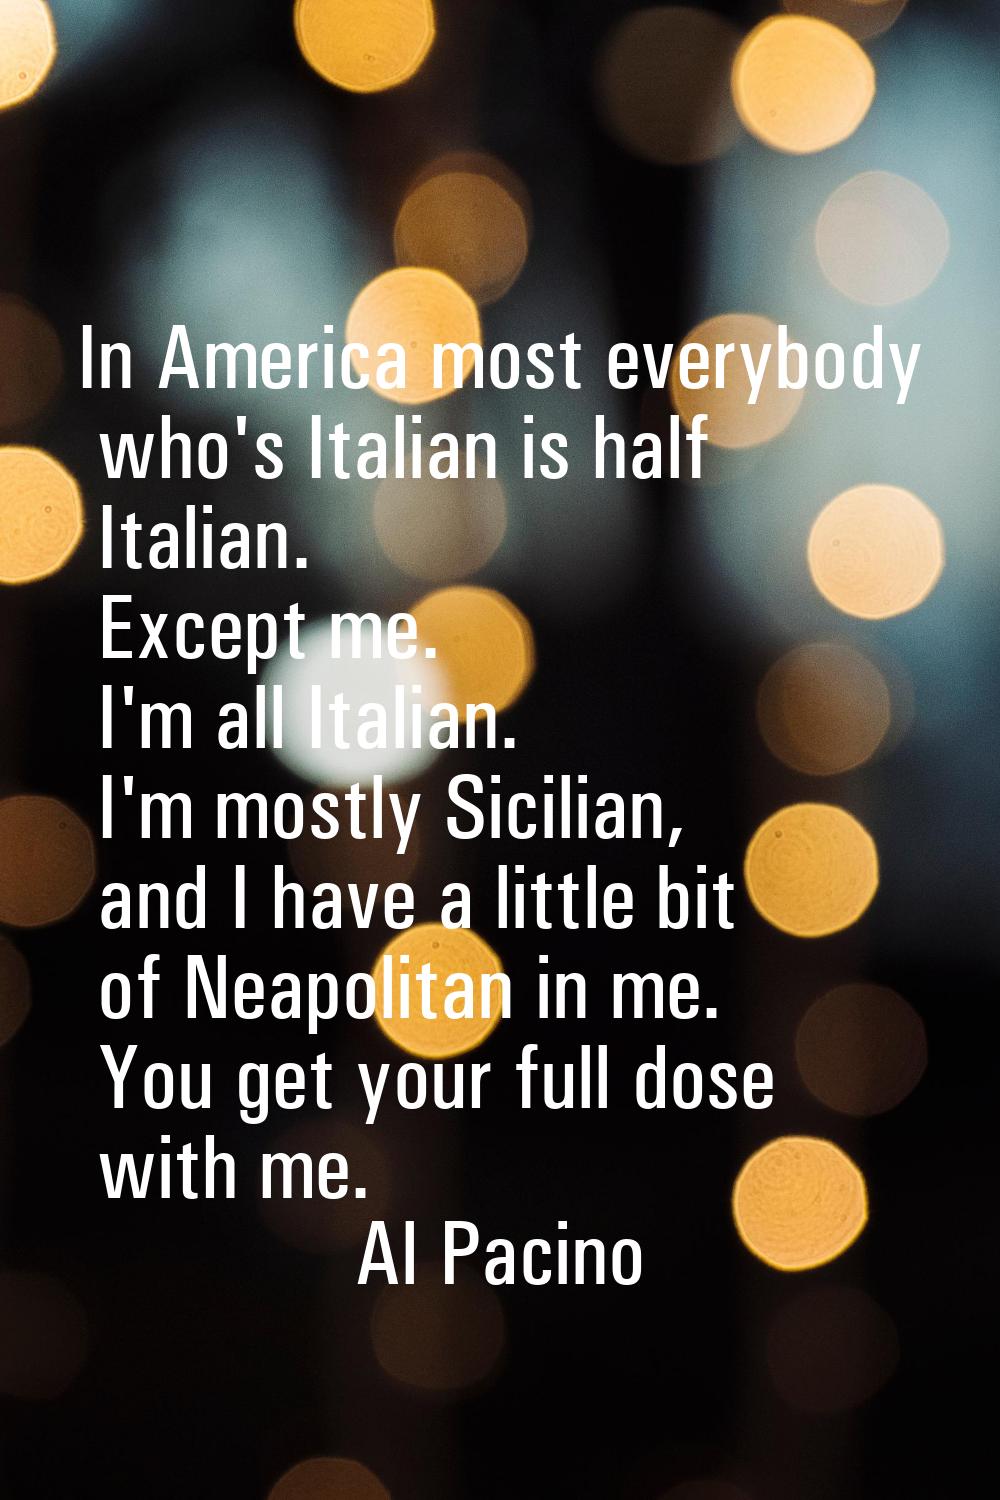 In America most everybody who's Italian is half Italian. Except me. I'm all Italian. I'm mostly Sic